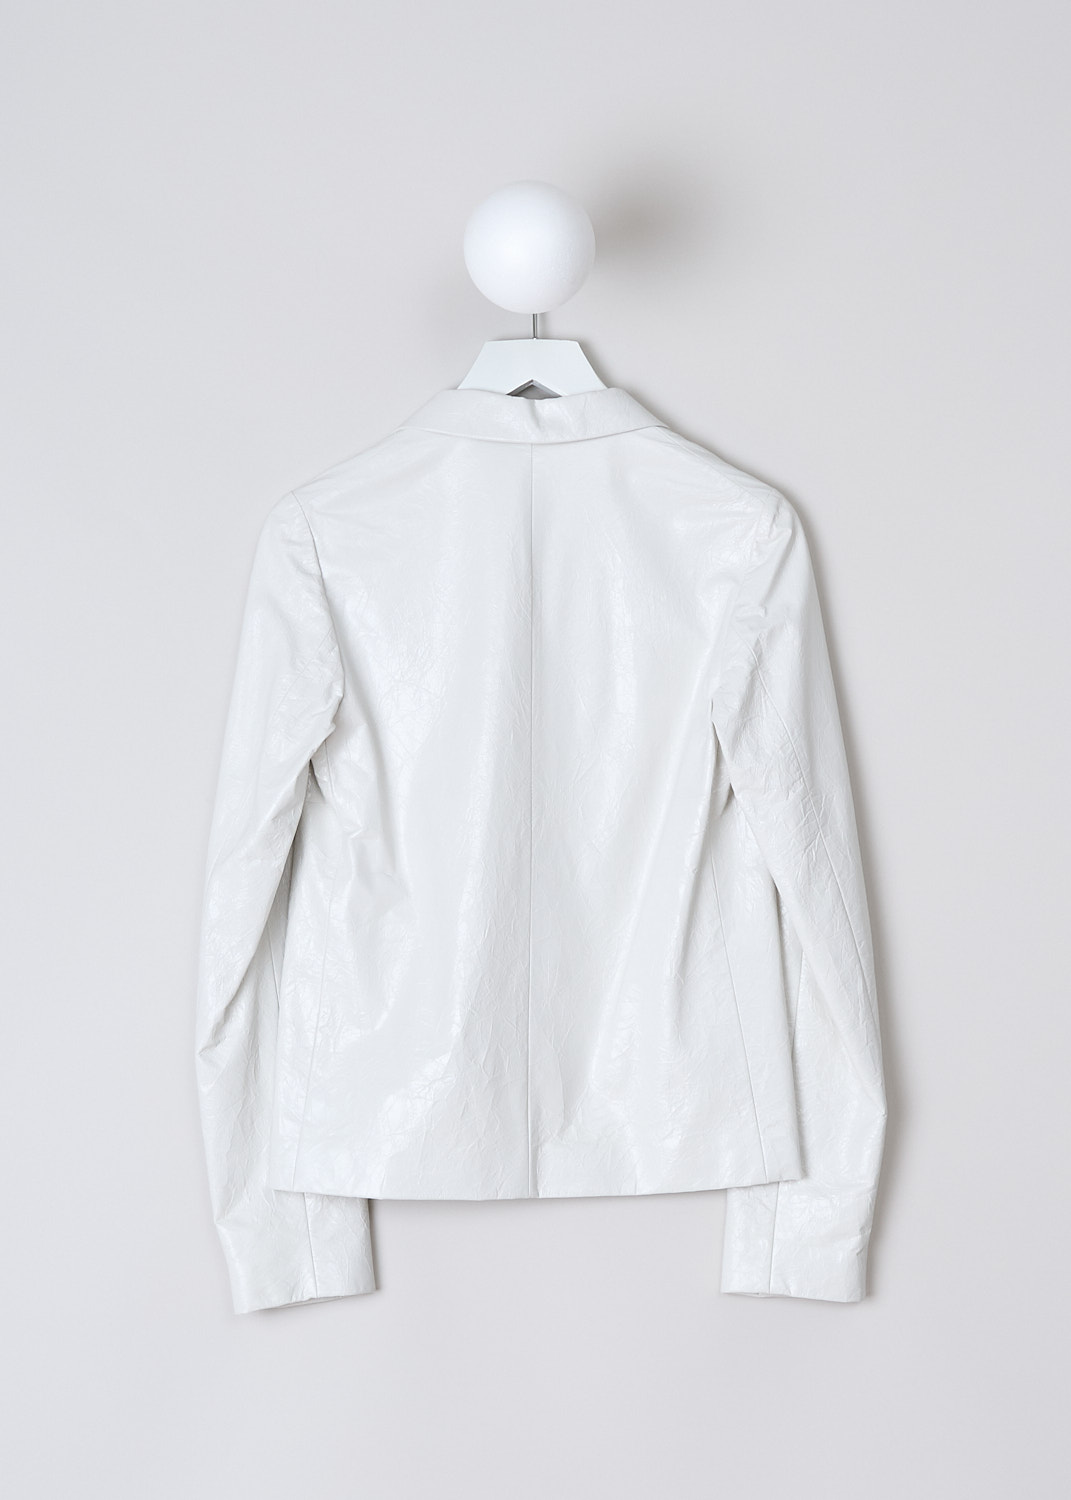 JIL SANDER, CROPPED WHITE CRACKLED LEATHER JACKET, JSPN651570_WNL00080_105, White, Back, This cropped jacket is made of a crackled white leather. The jacket has a notched lapel and a front button closure with black buttons. In the front, the jacket has a single patch pocket to one side. The jacket has a straight hemline. 

